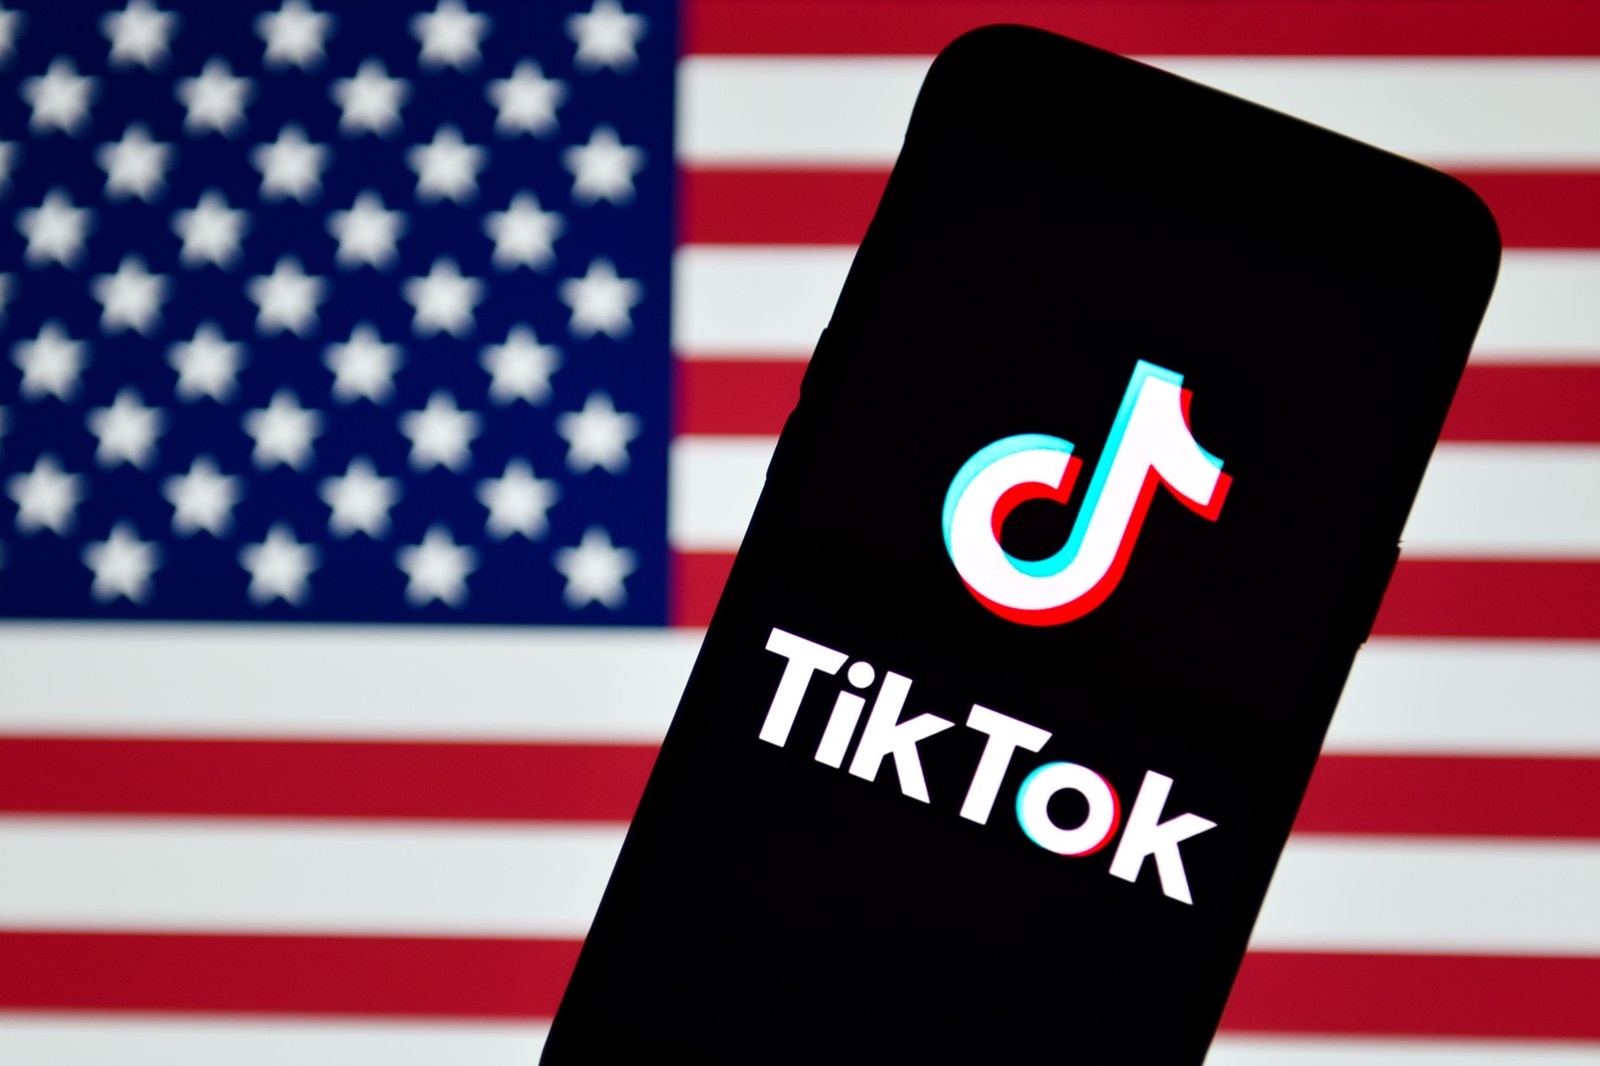 In this photo illustration a TikTok logo is seen displayed on a smartphone with the chinese flag in the background. - Sheldon Cooper / SOPA Images//SOPAIMAGES_TikTok(2)/2009141023/Credit:SOPA Images / SIPA/SIPA/2009141024,Image: 557871230, License: Rights-managed, Restrictions: , Model Release: no, Credit line: SOPA Images / Sipa Press / Profimedia